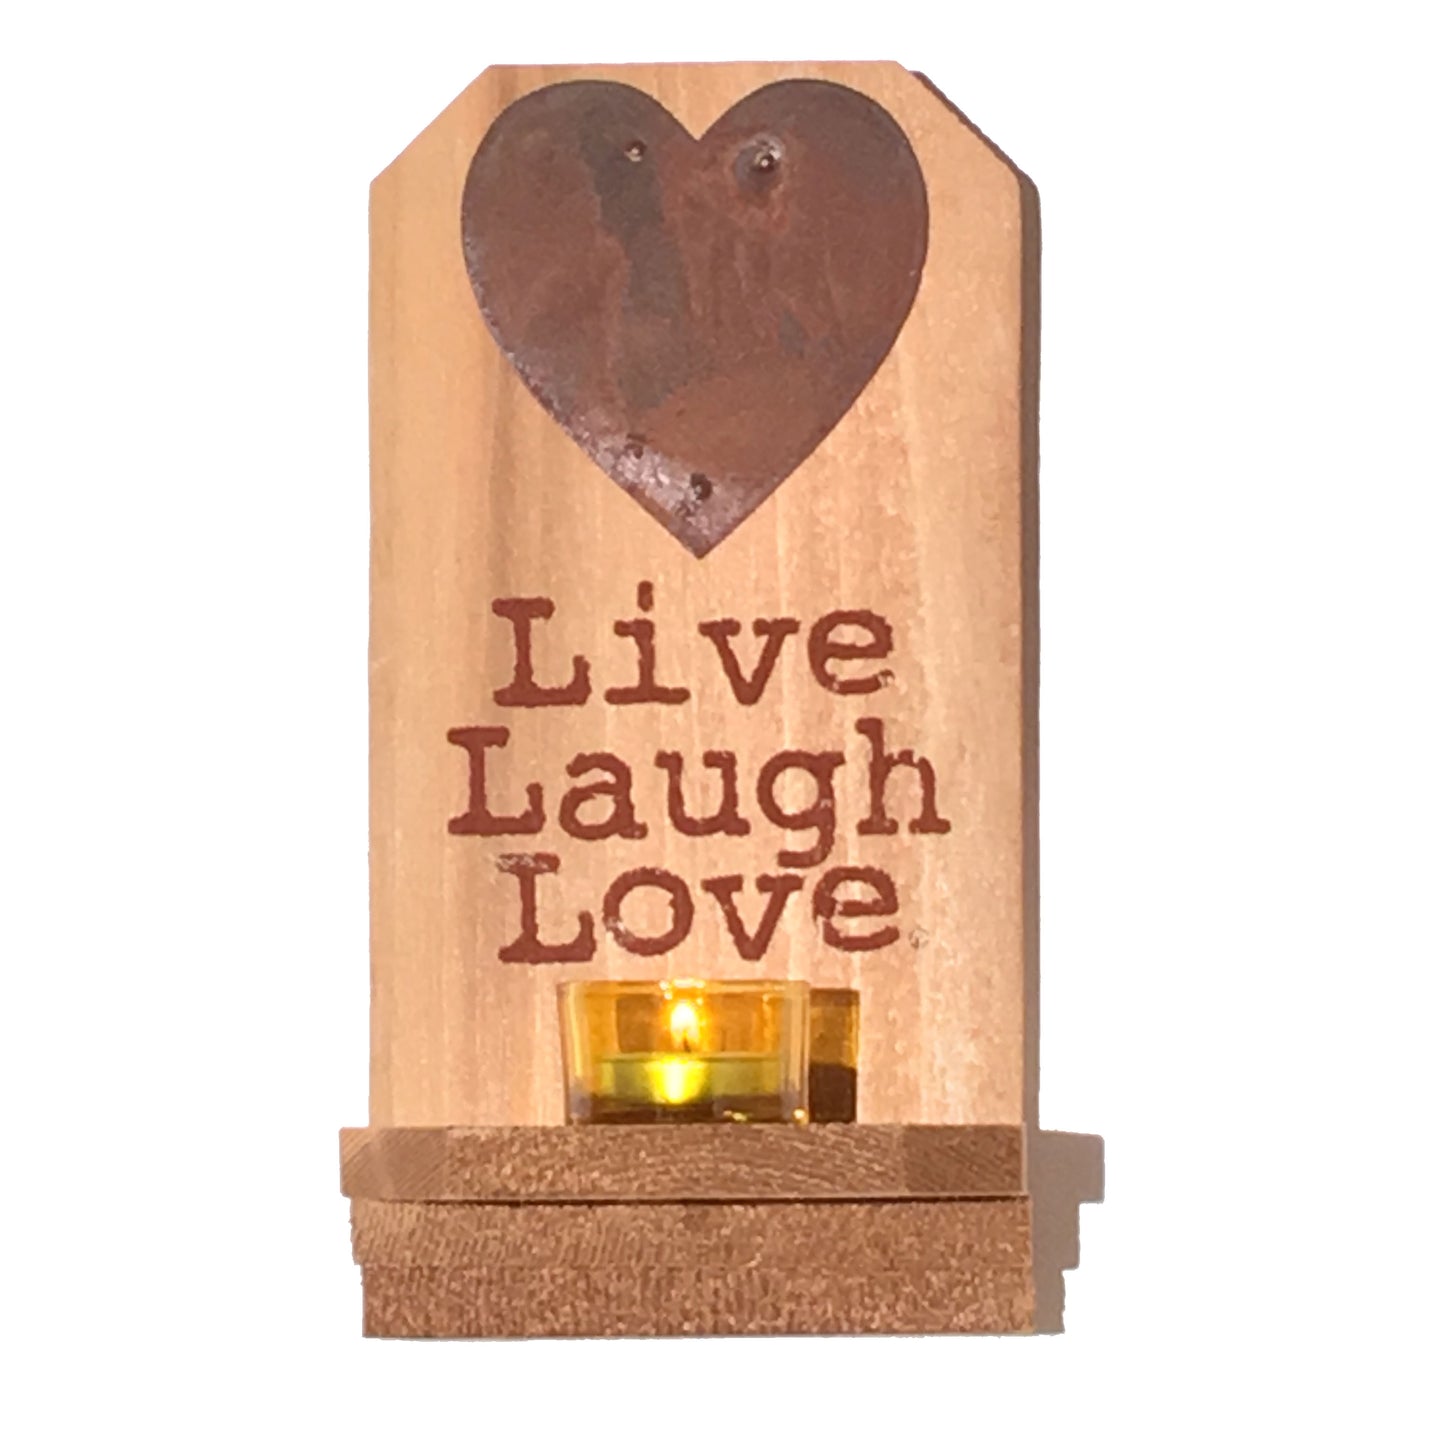 Rustic Heart Wall Candle Sconce of  rustic cedar wood by Live Laugh Love®